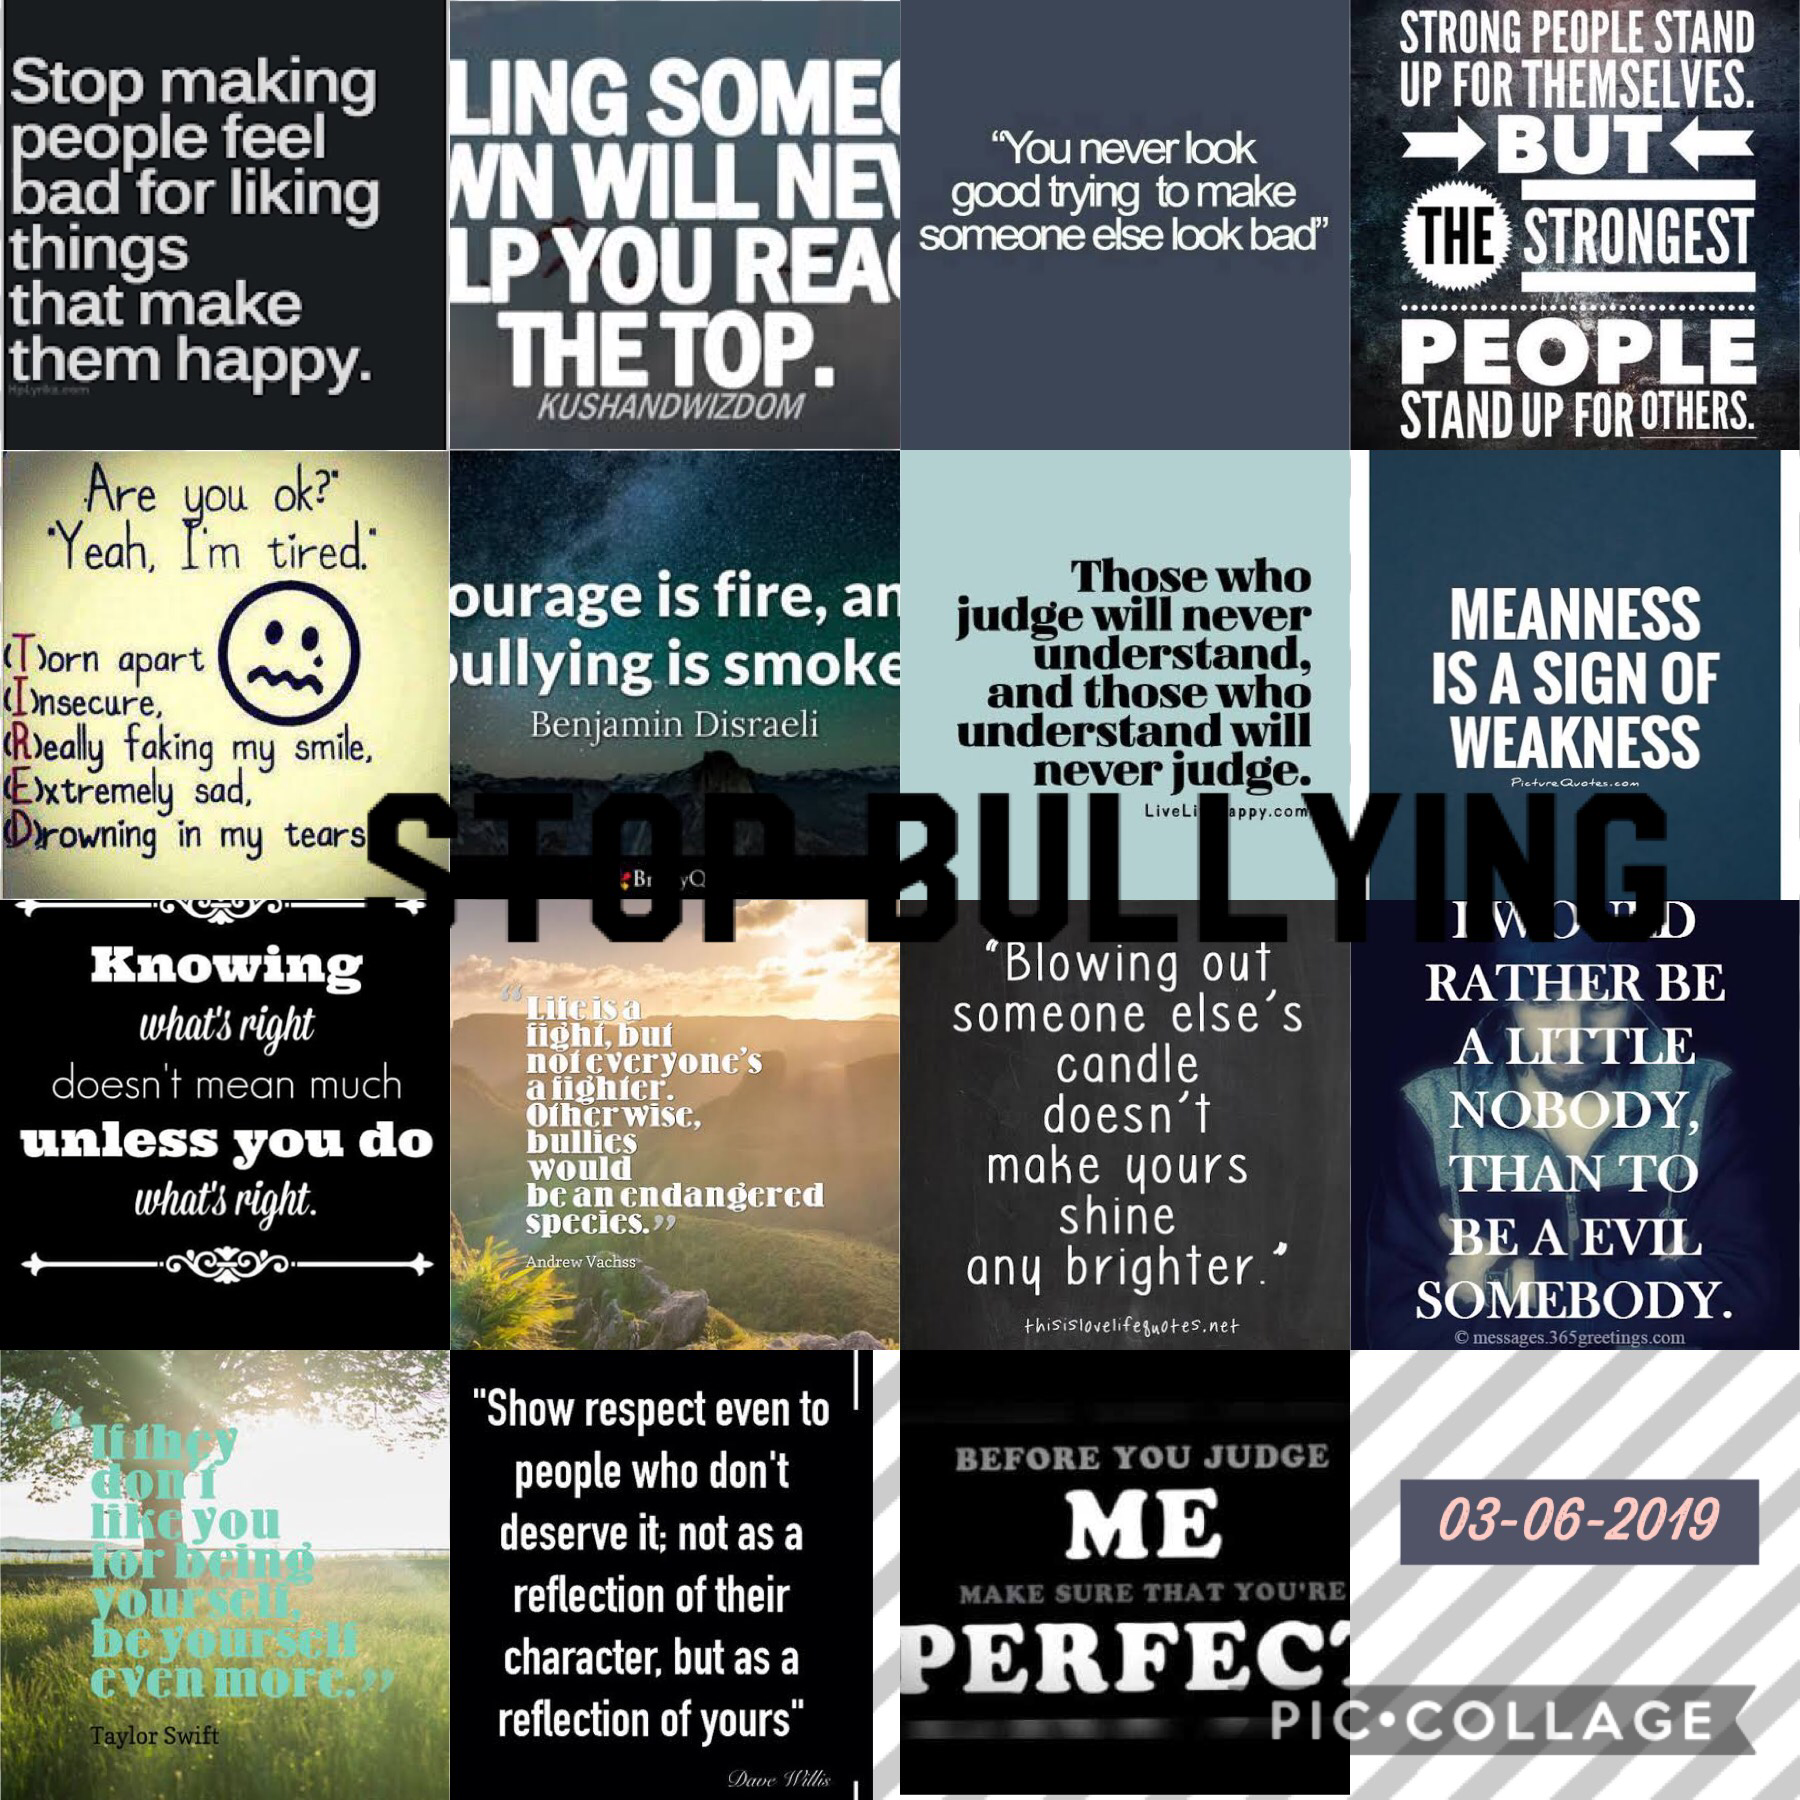 STOP BULLYING!!!!!!!!!!!

Please help to make a difference by stopping bullying. Stand up for a friend if they need help. Bullying is not right. 

